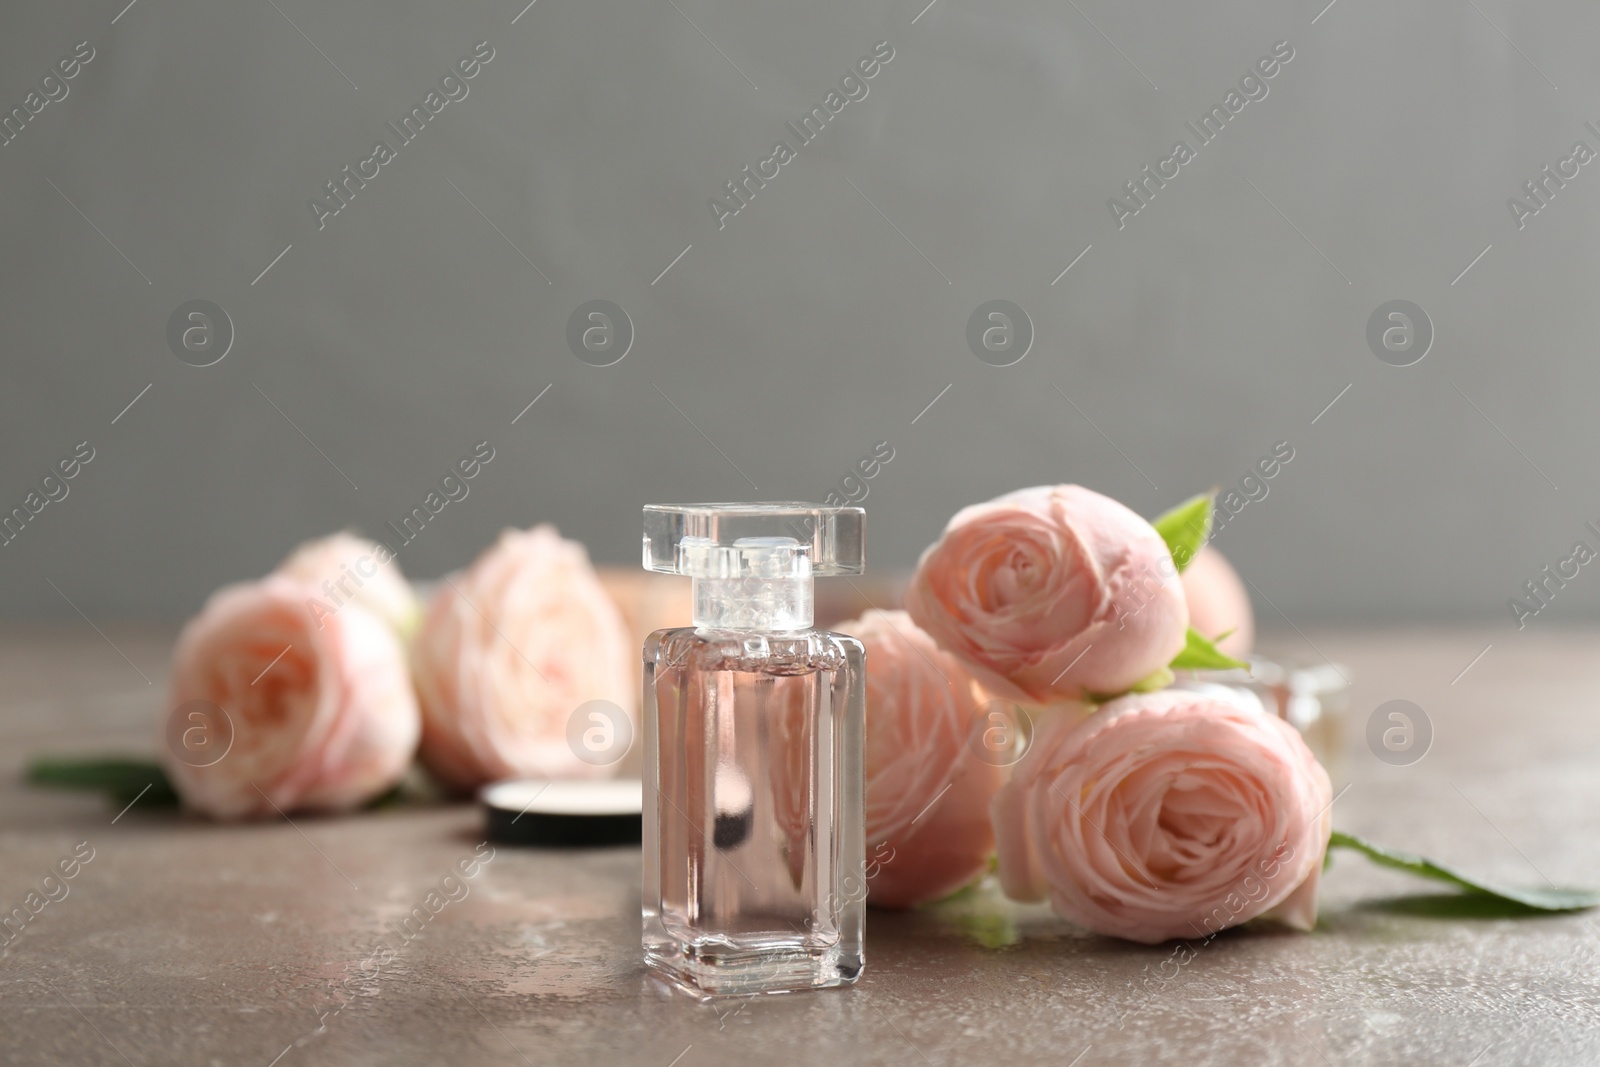 Photo of Bottle of perfume and roses on table against grey background